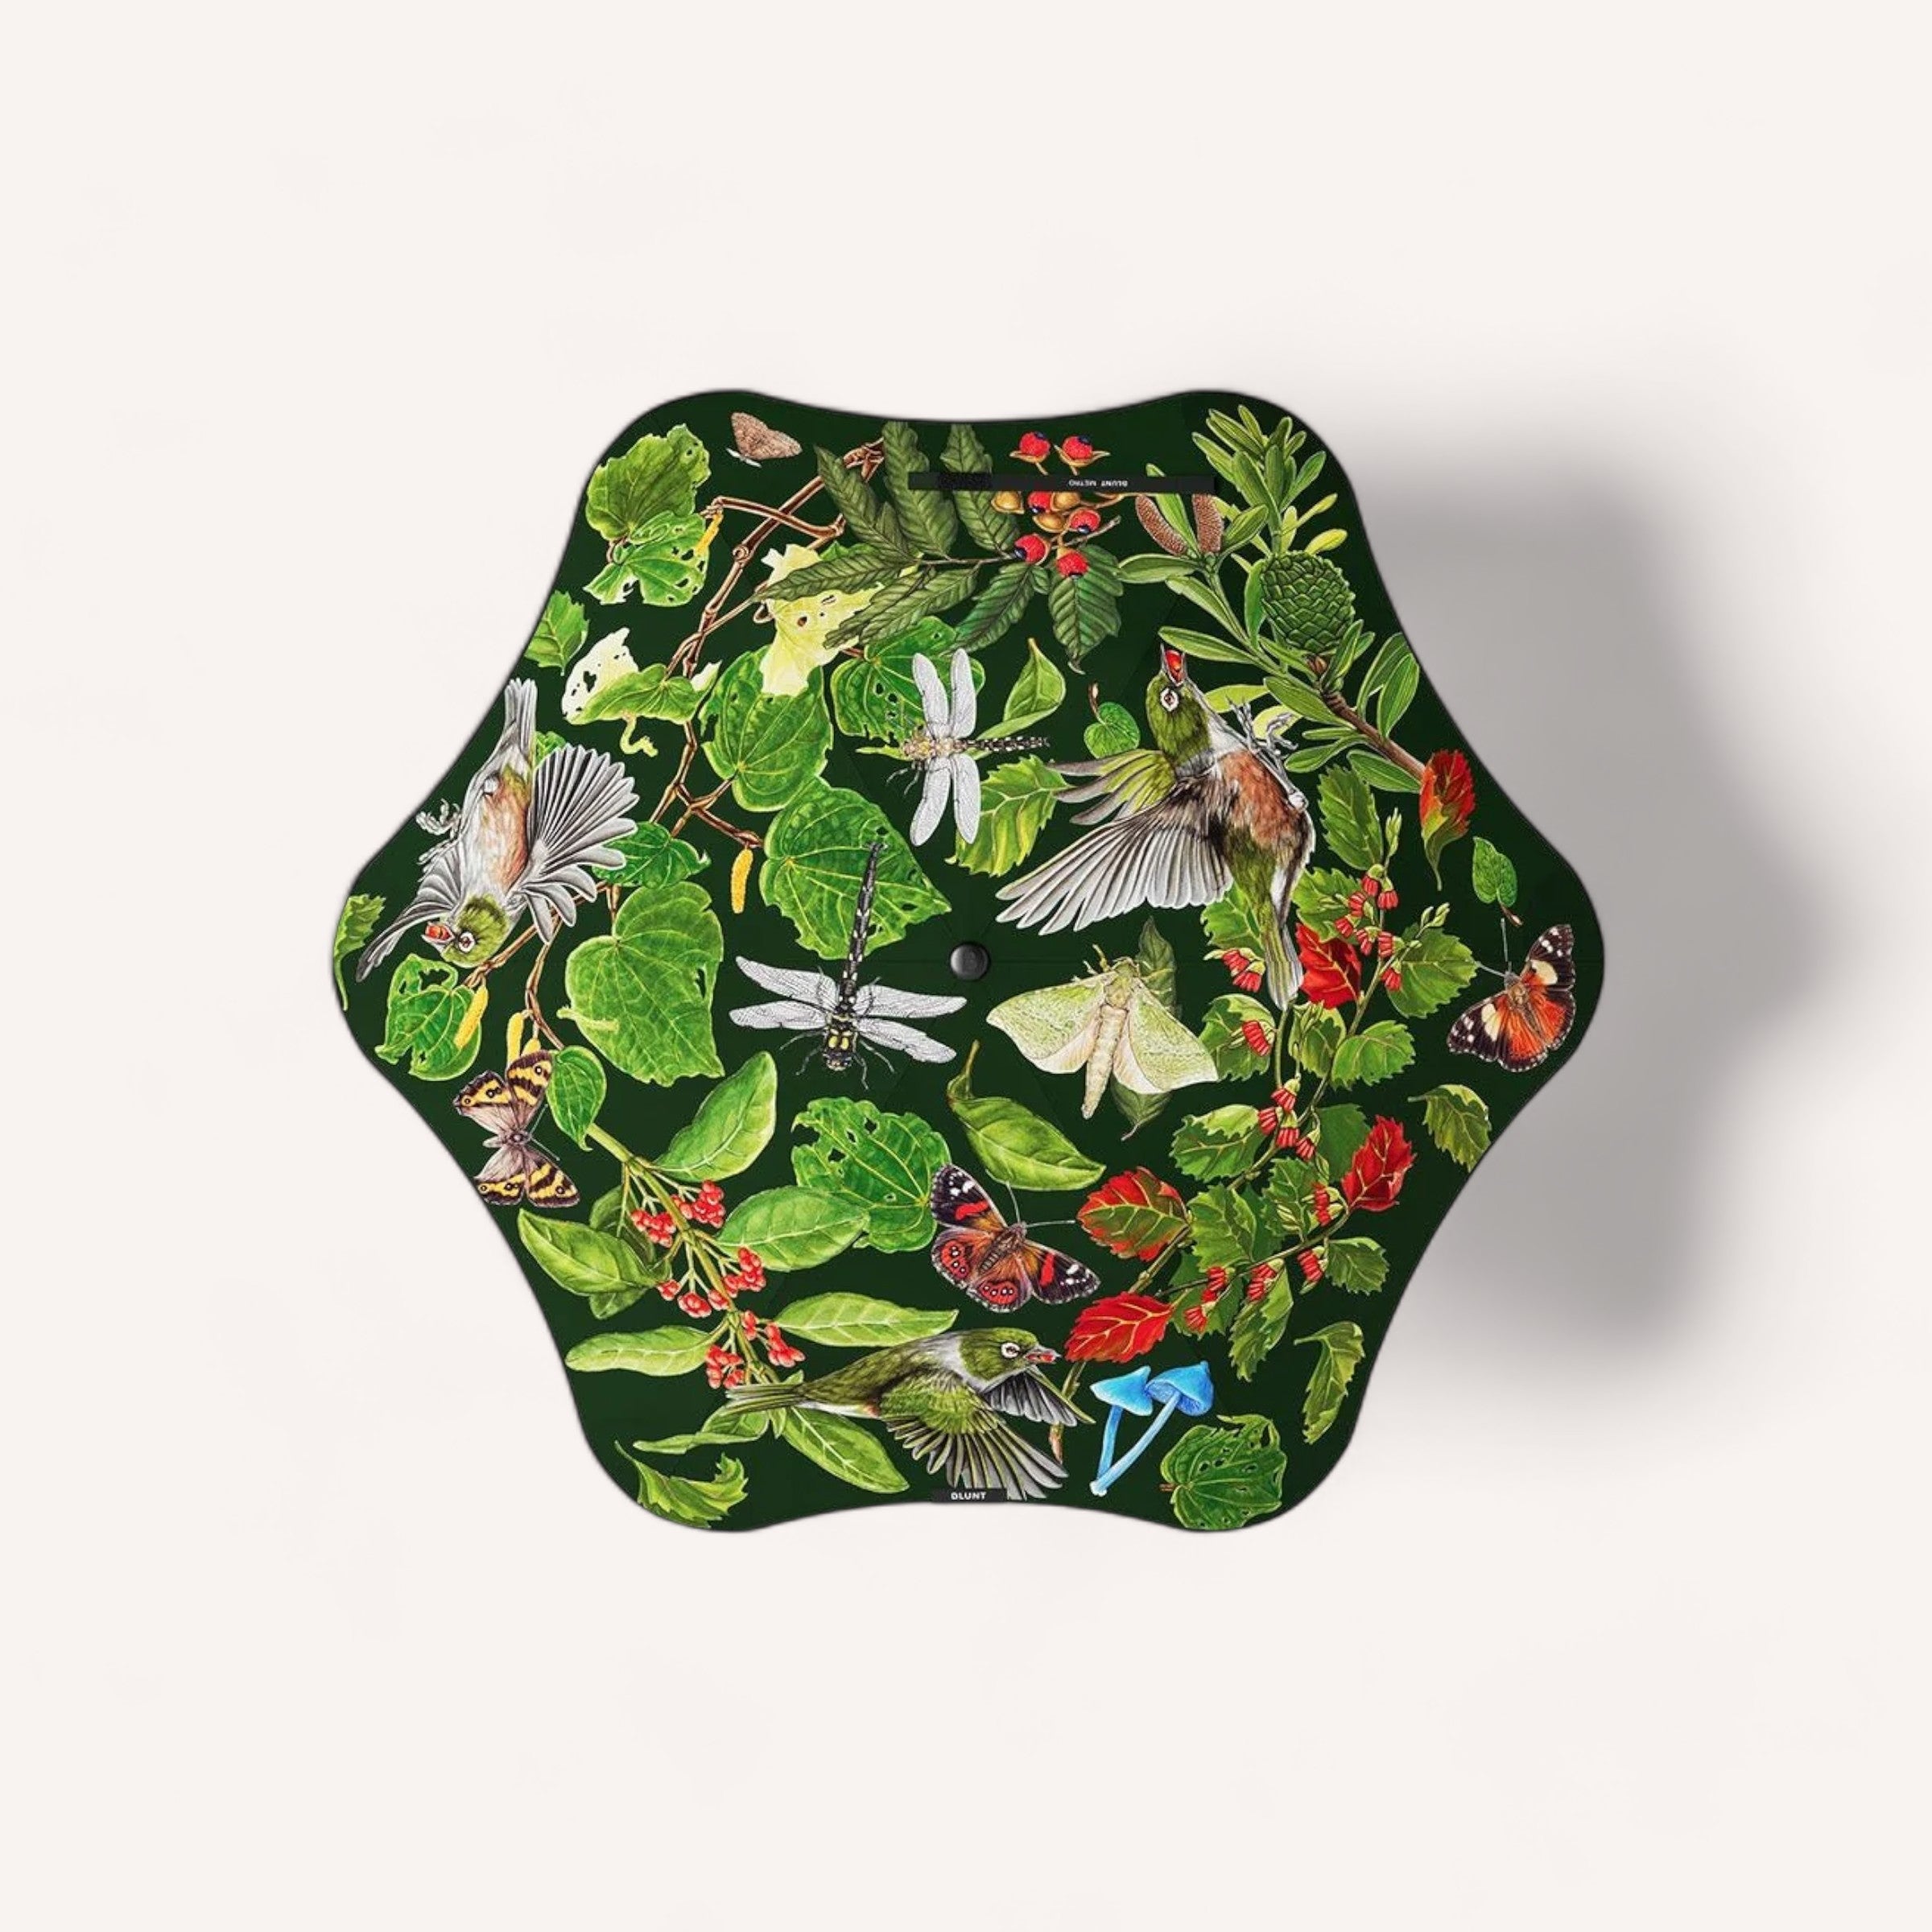 A BLUNT Metro Umbrella Forest & Bird - Limited Edition with a hexagon-shaped design and a vividly colored nature illustration, showcasing an array of flora and fauna including birds, butterflies, and lush green leaves on a white background.